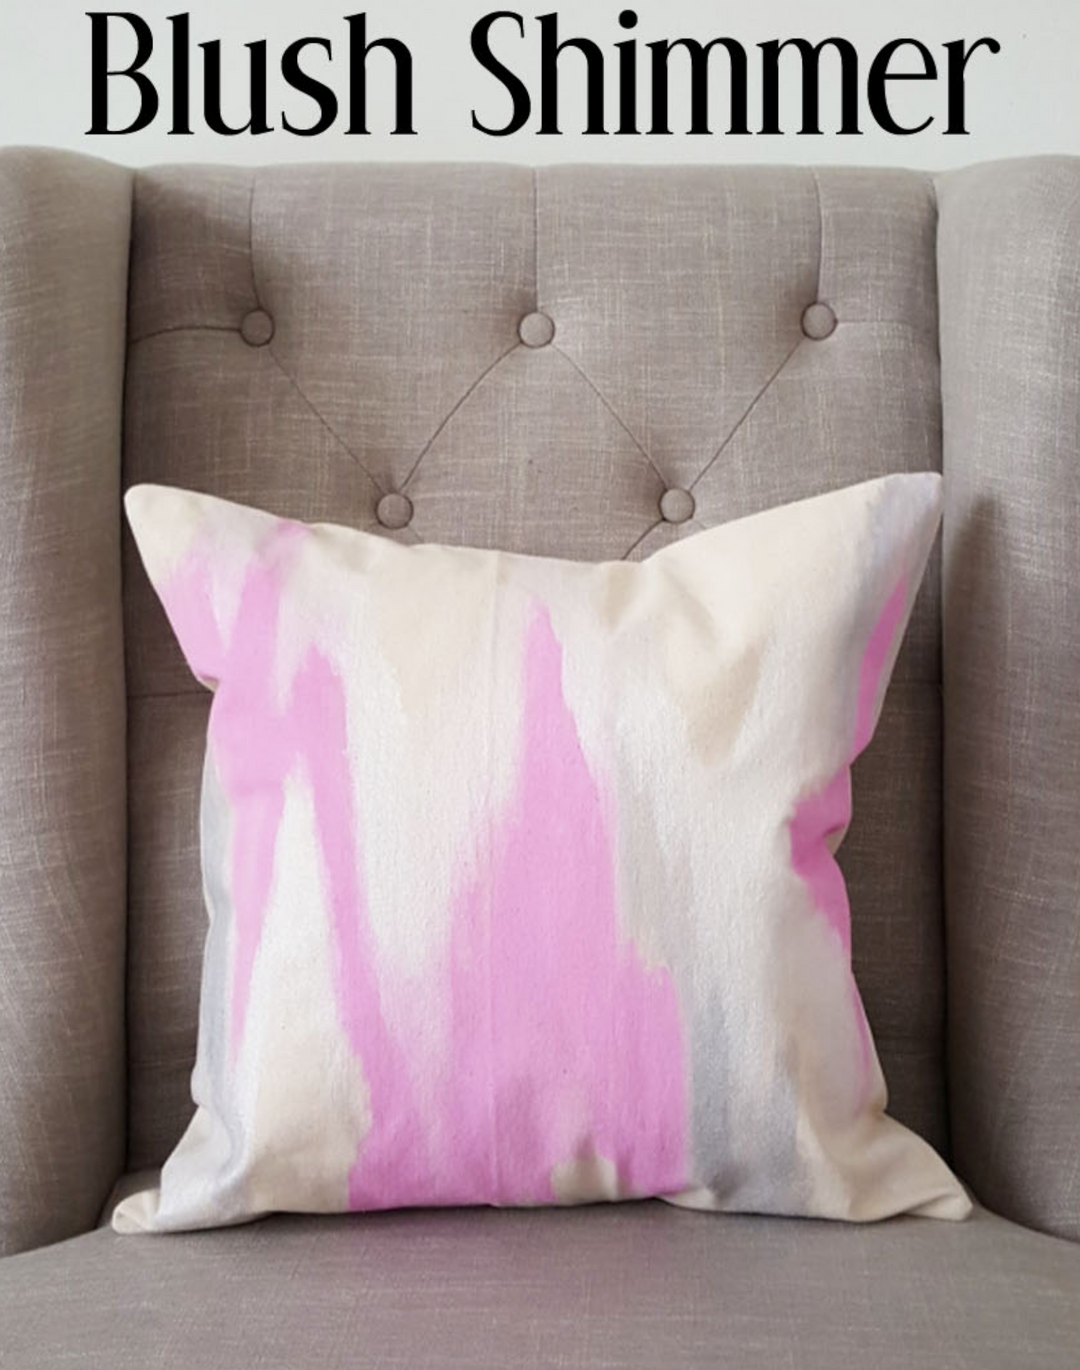 Julie Kay Hand Painted Watercolor Pillow Cover, Blush Shimmer